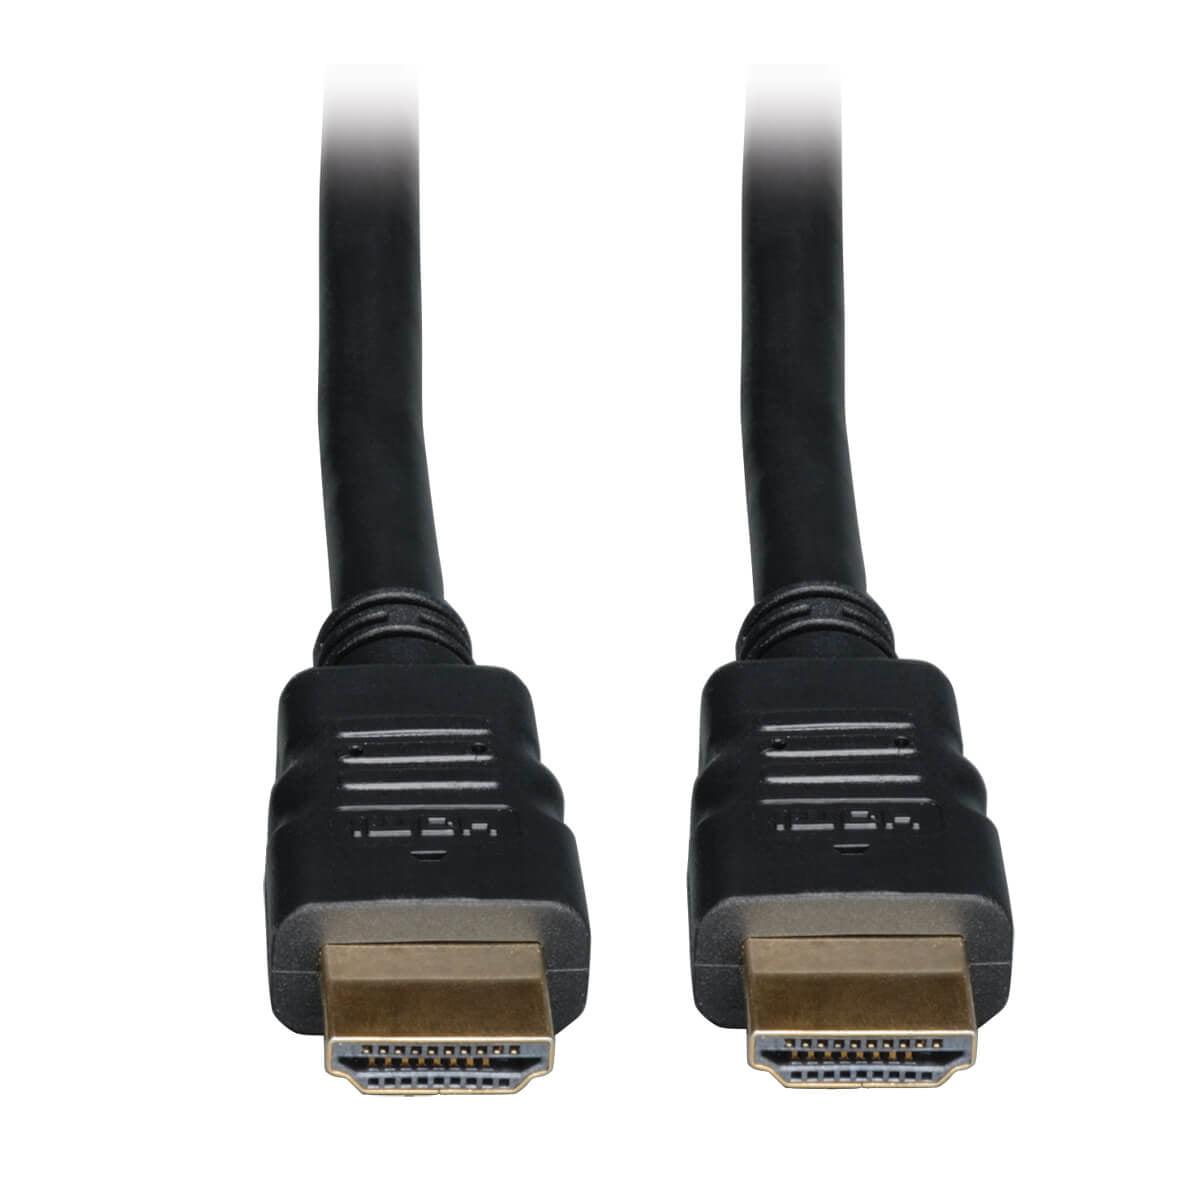 Tripp Lite P569-016 High Speed Hdmi Cable With Ethernet, Uhd 4K, Digital Video With Audio (M/M), 16 Ft. (4.88 M)